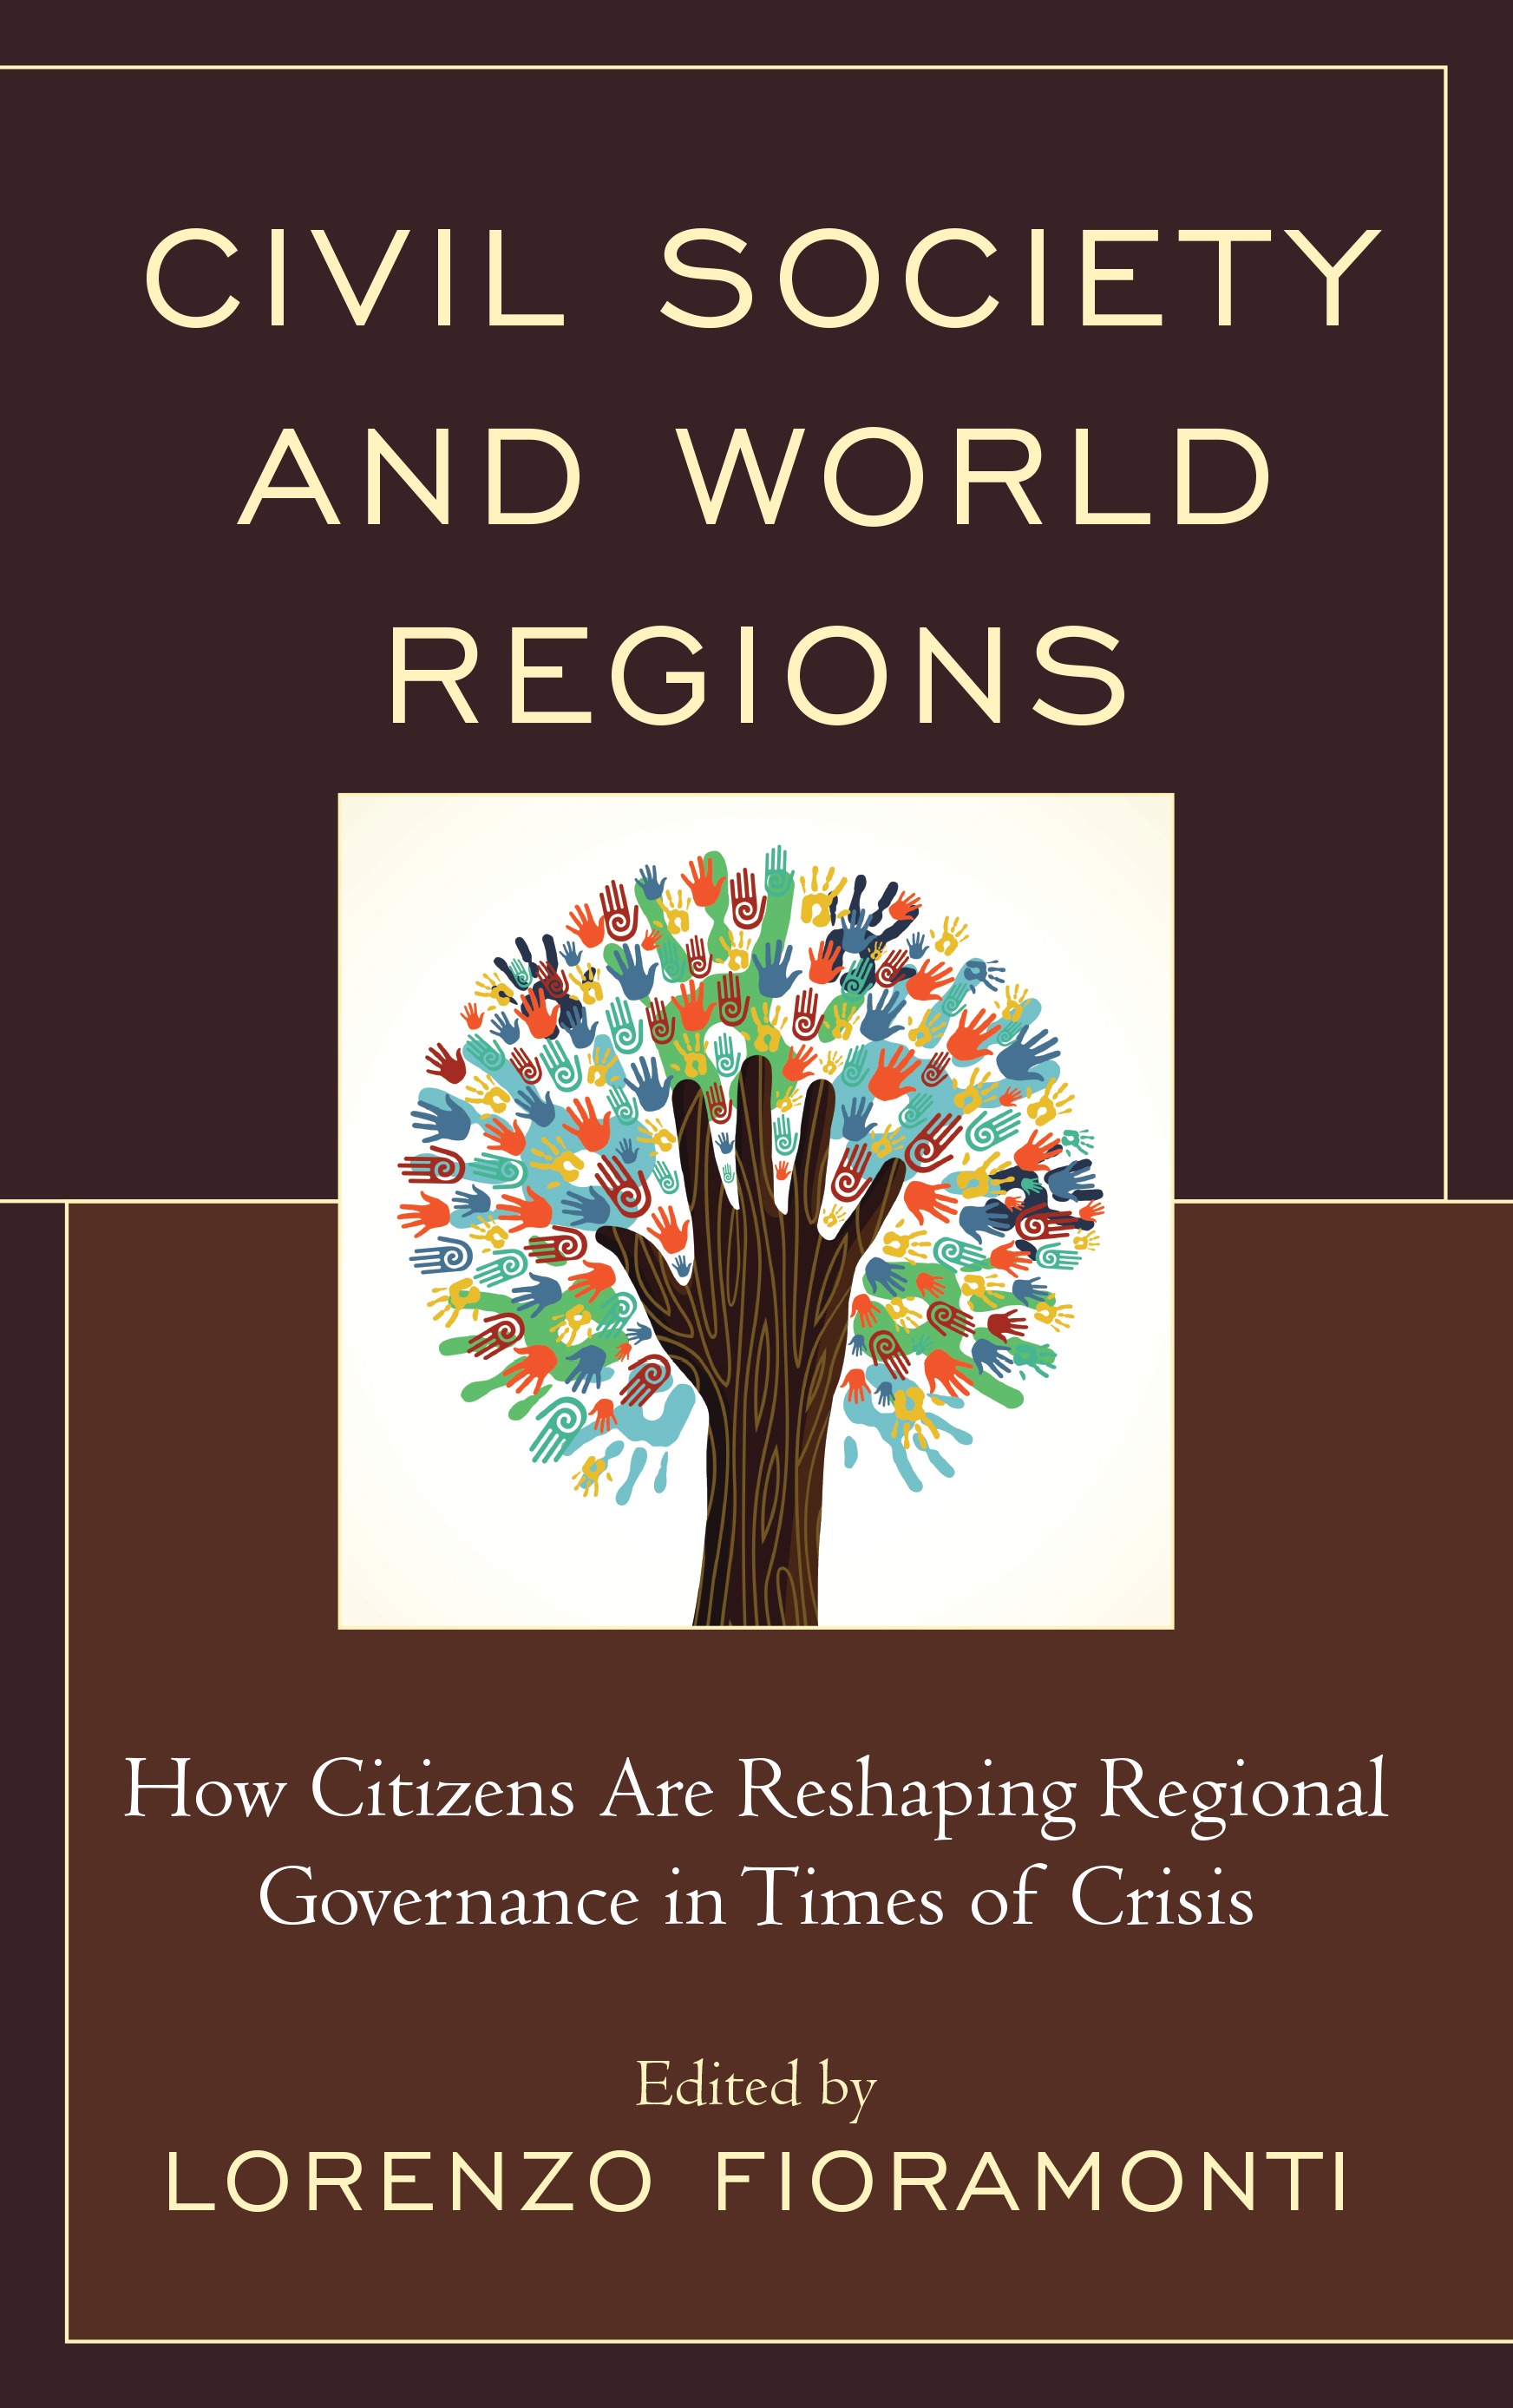 Civil Society and World Regions: How Citizens Are Reshaping Regional Governance in Times of Crisis